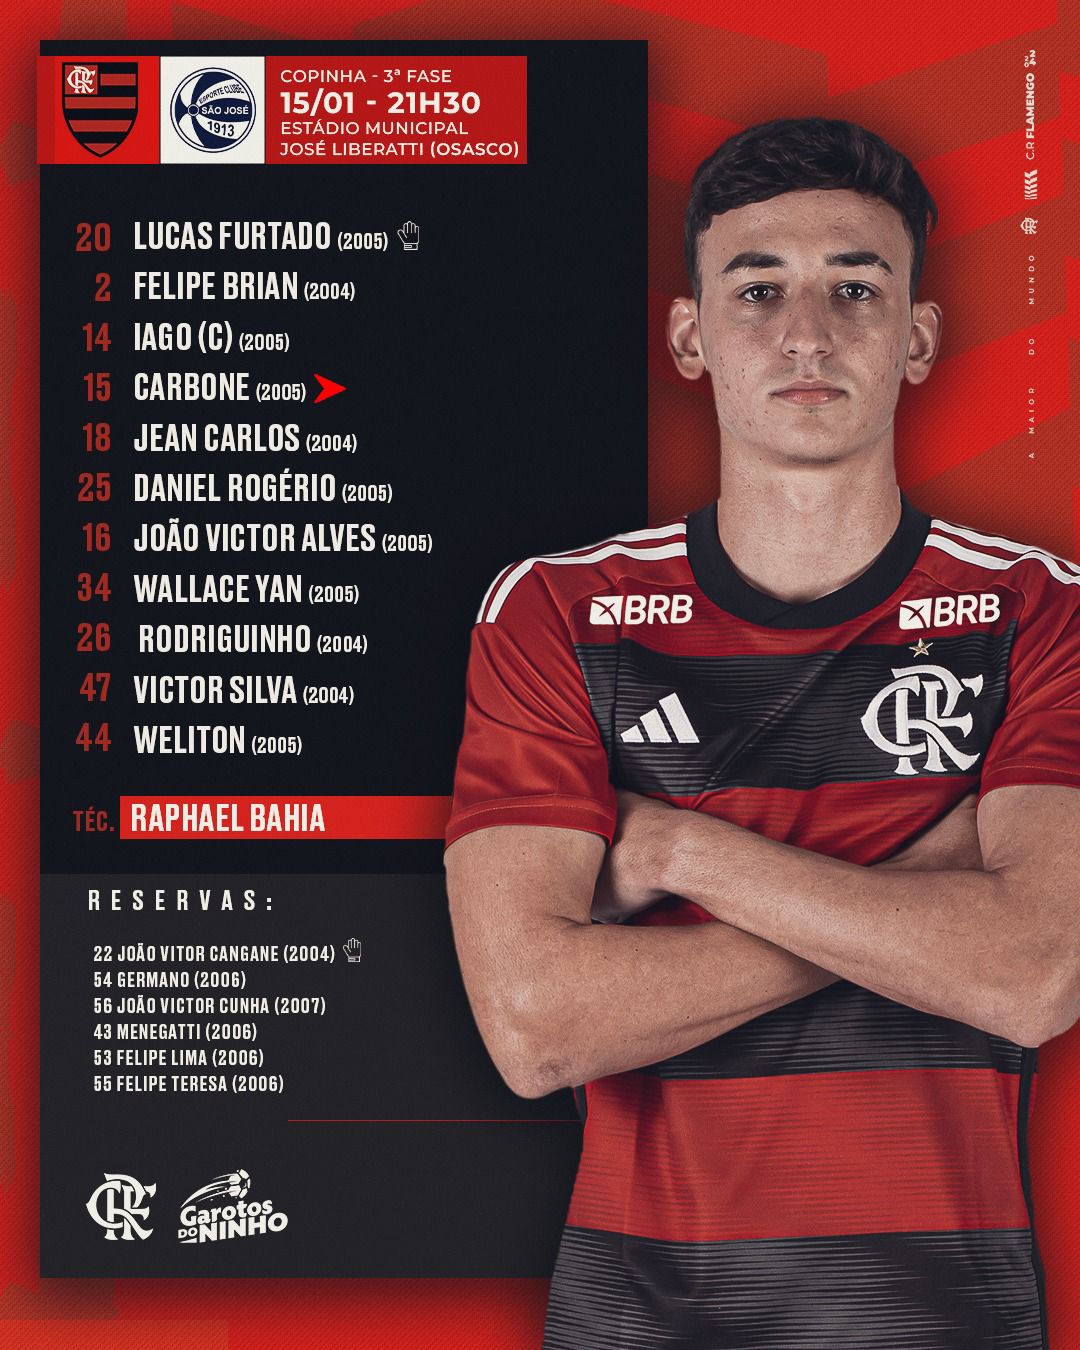 Find out about Flamengo's lineup to face Copinha